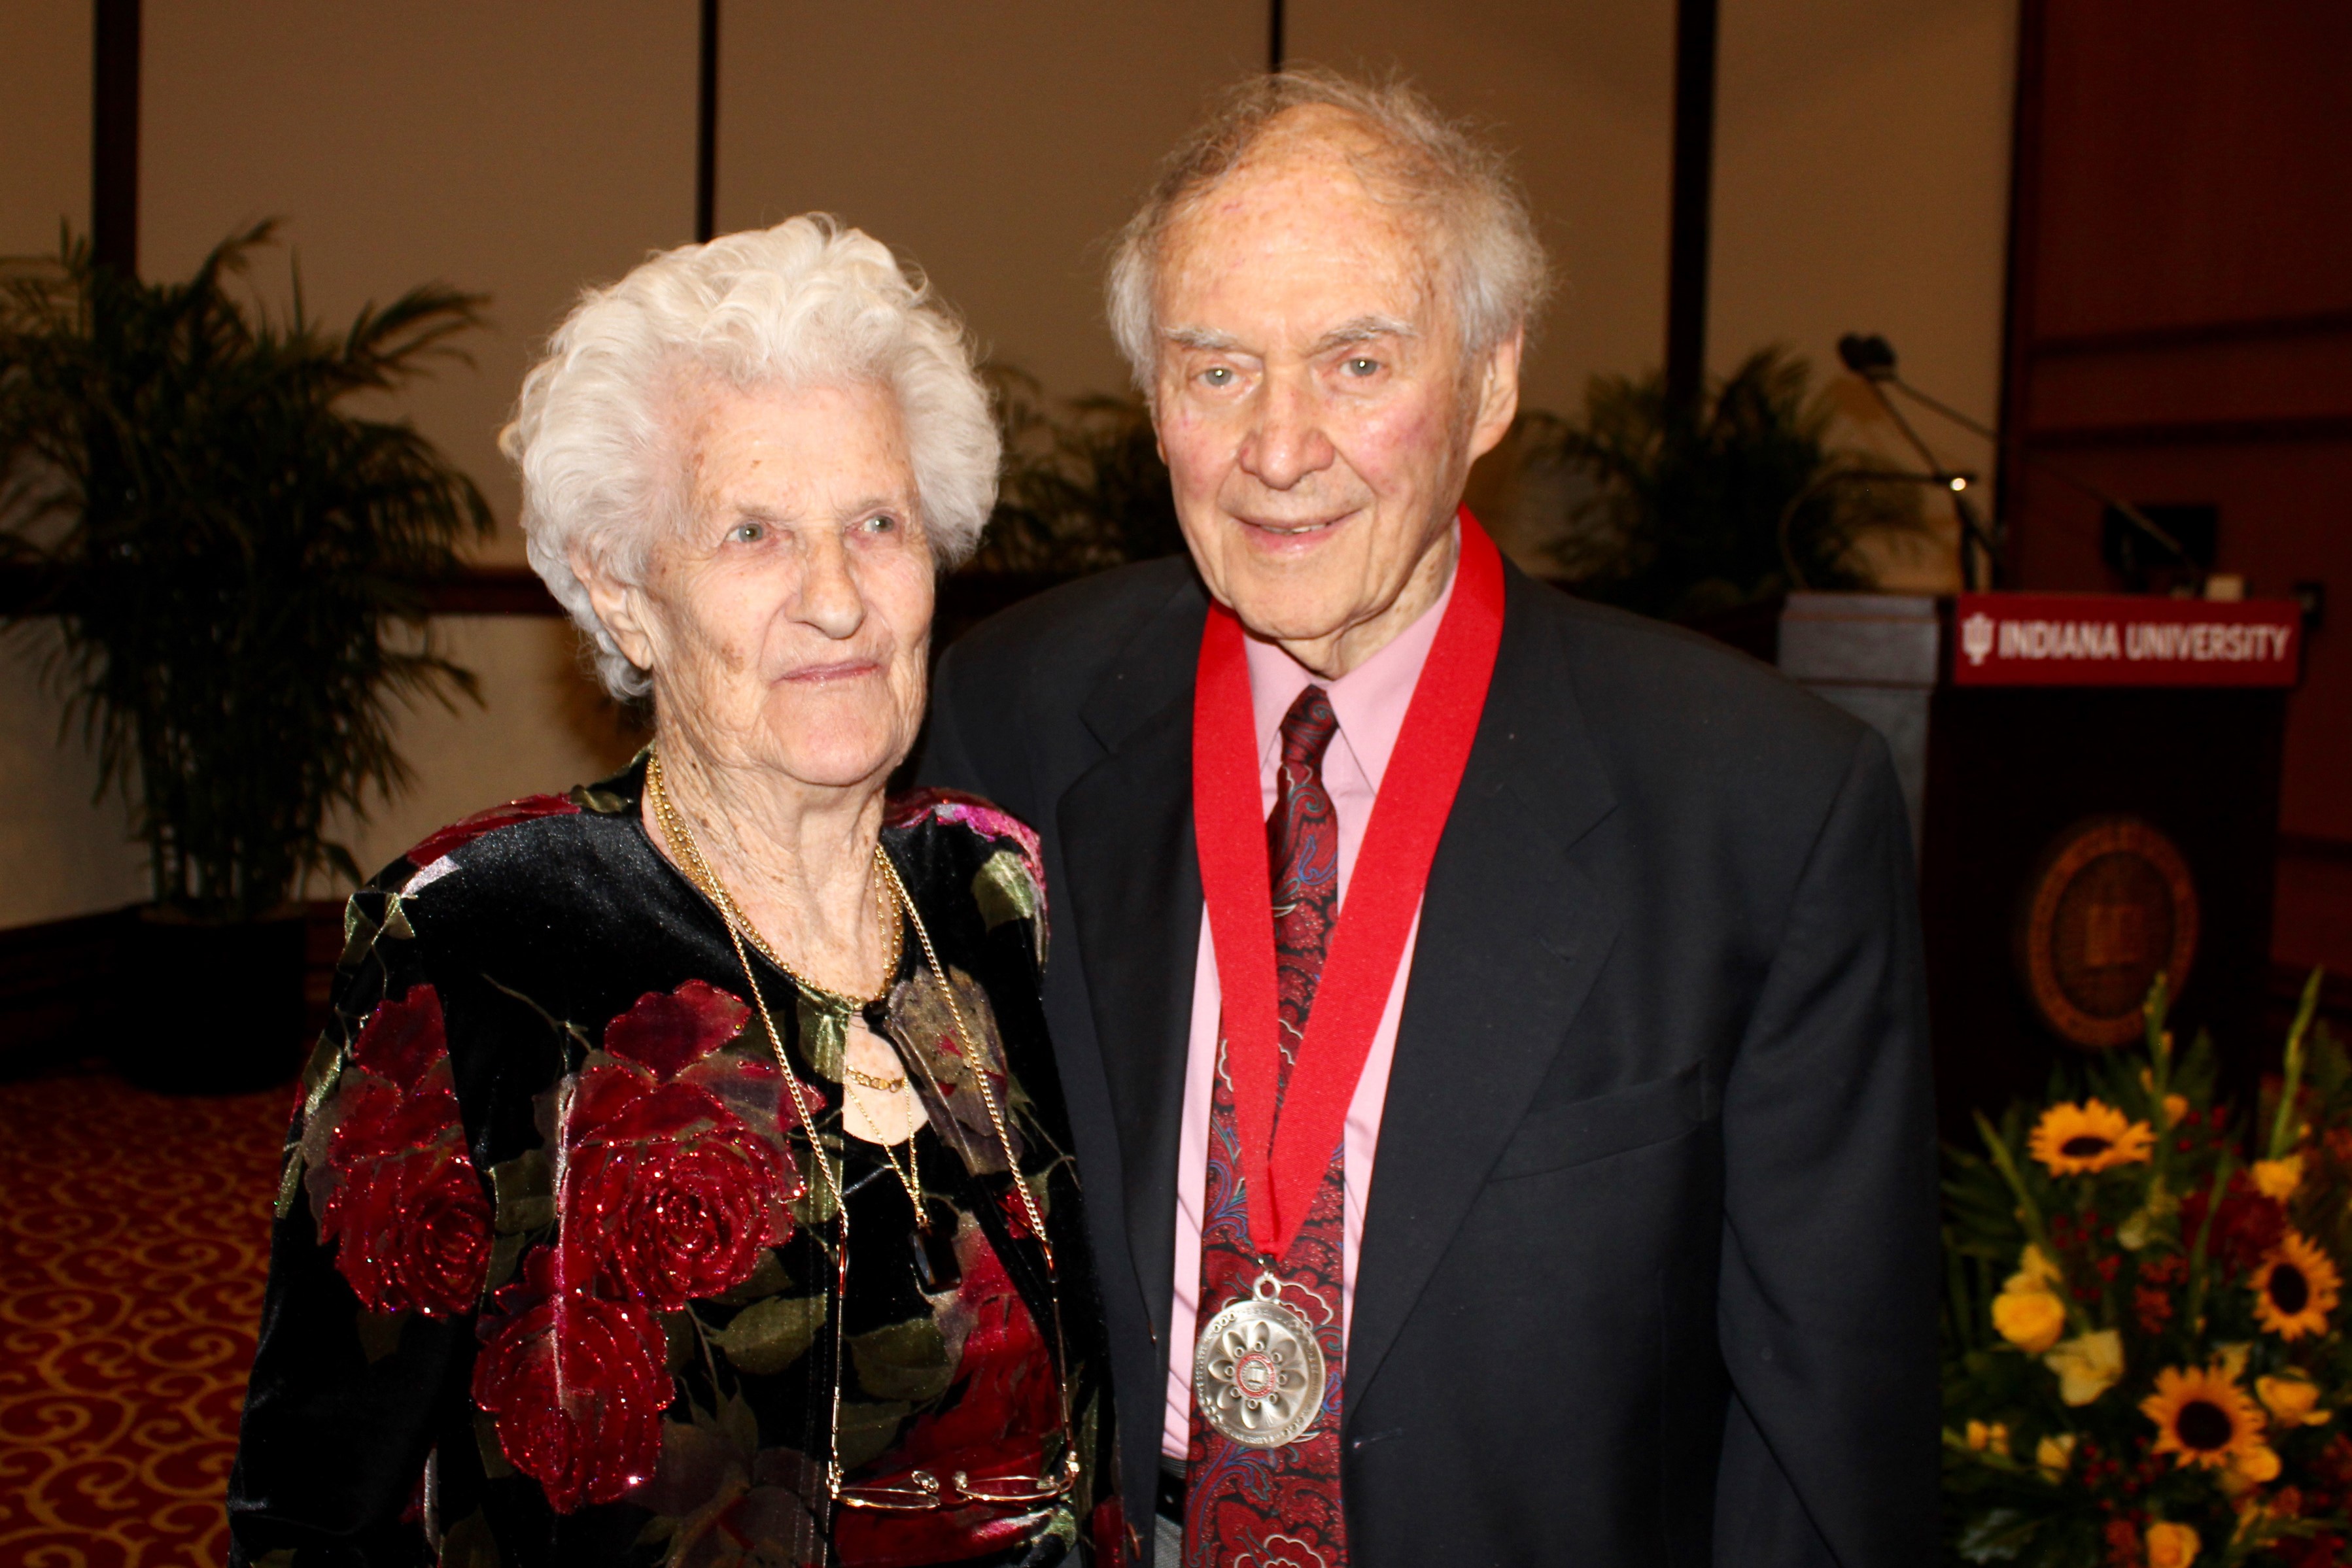 Rudy Pozzatti and his wife, Dorothy, at IU's 2018 President's Medal for Excellence ceremony.